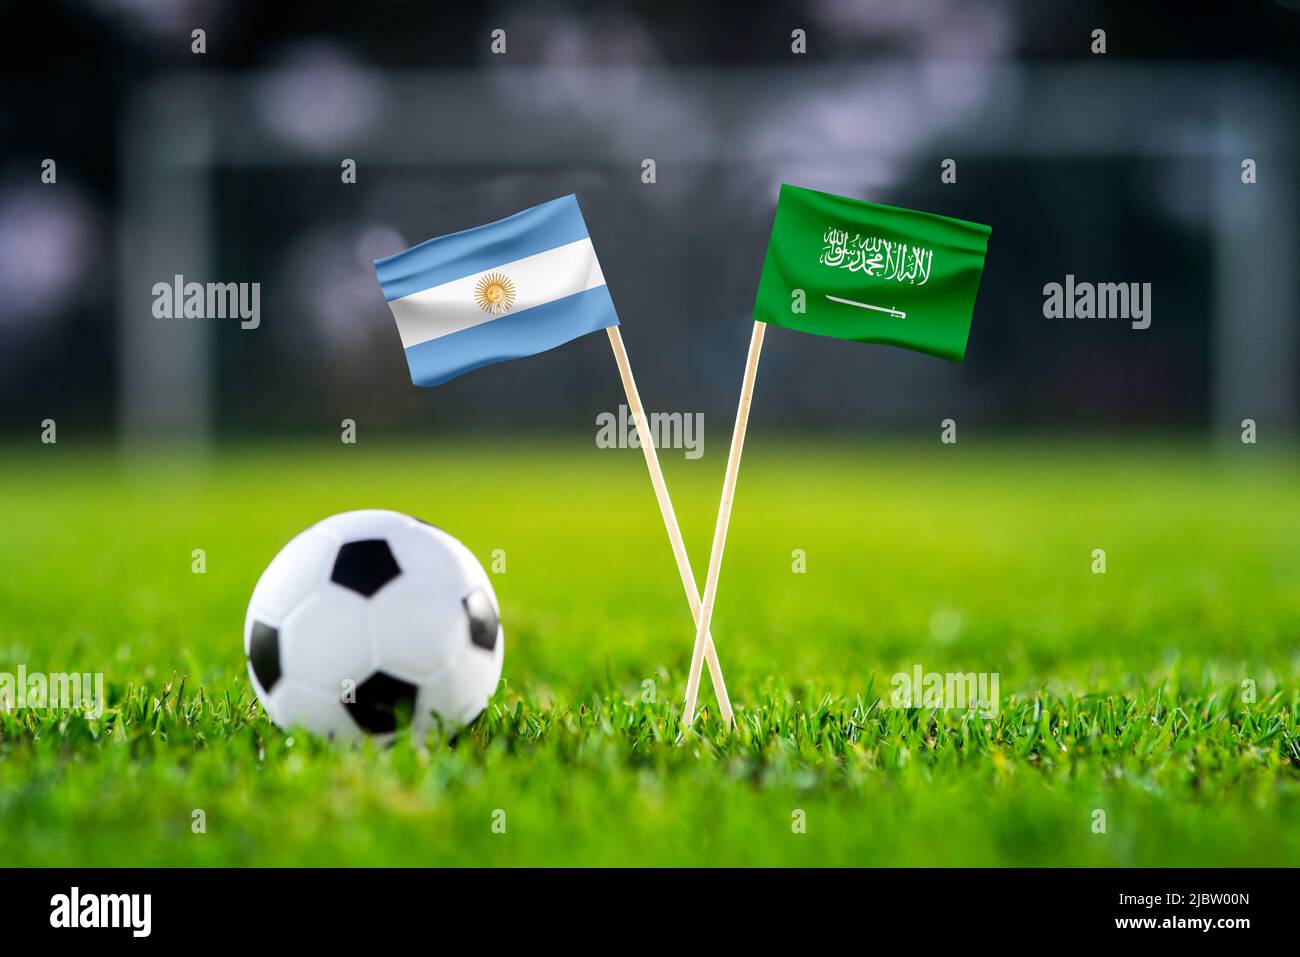 Argentina vs. Saudi Arabia, Lusail,, Football match wallpaper, Handmade national flags and soccer ball on green grass. Football stadium in background. Stock Photo